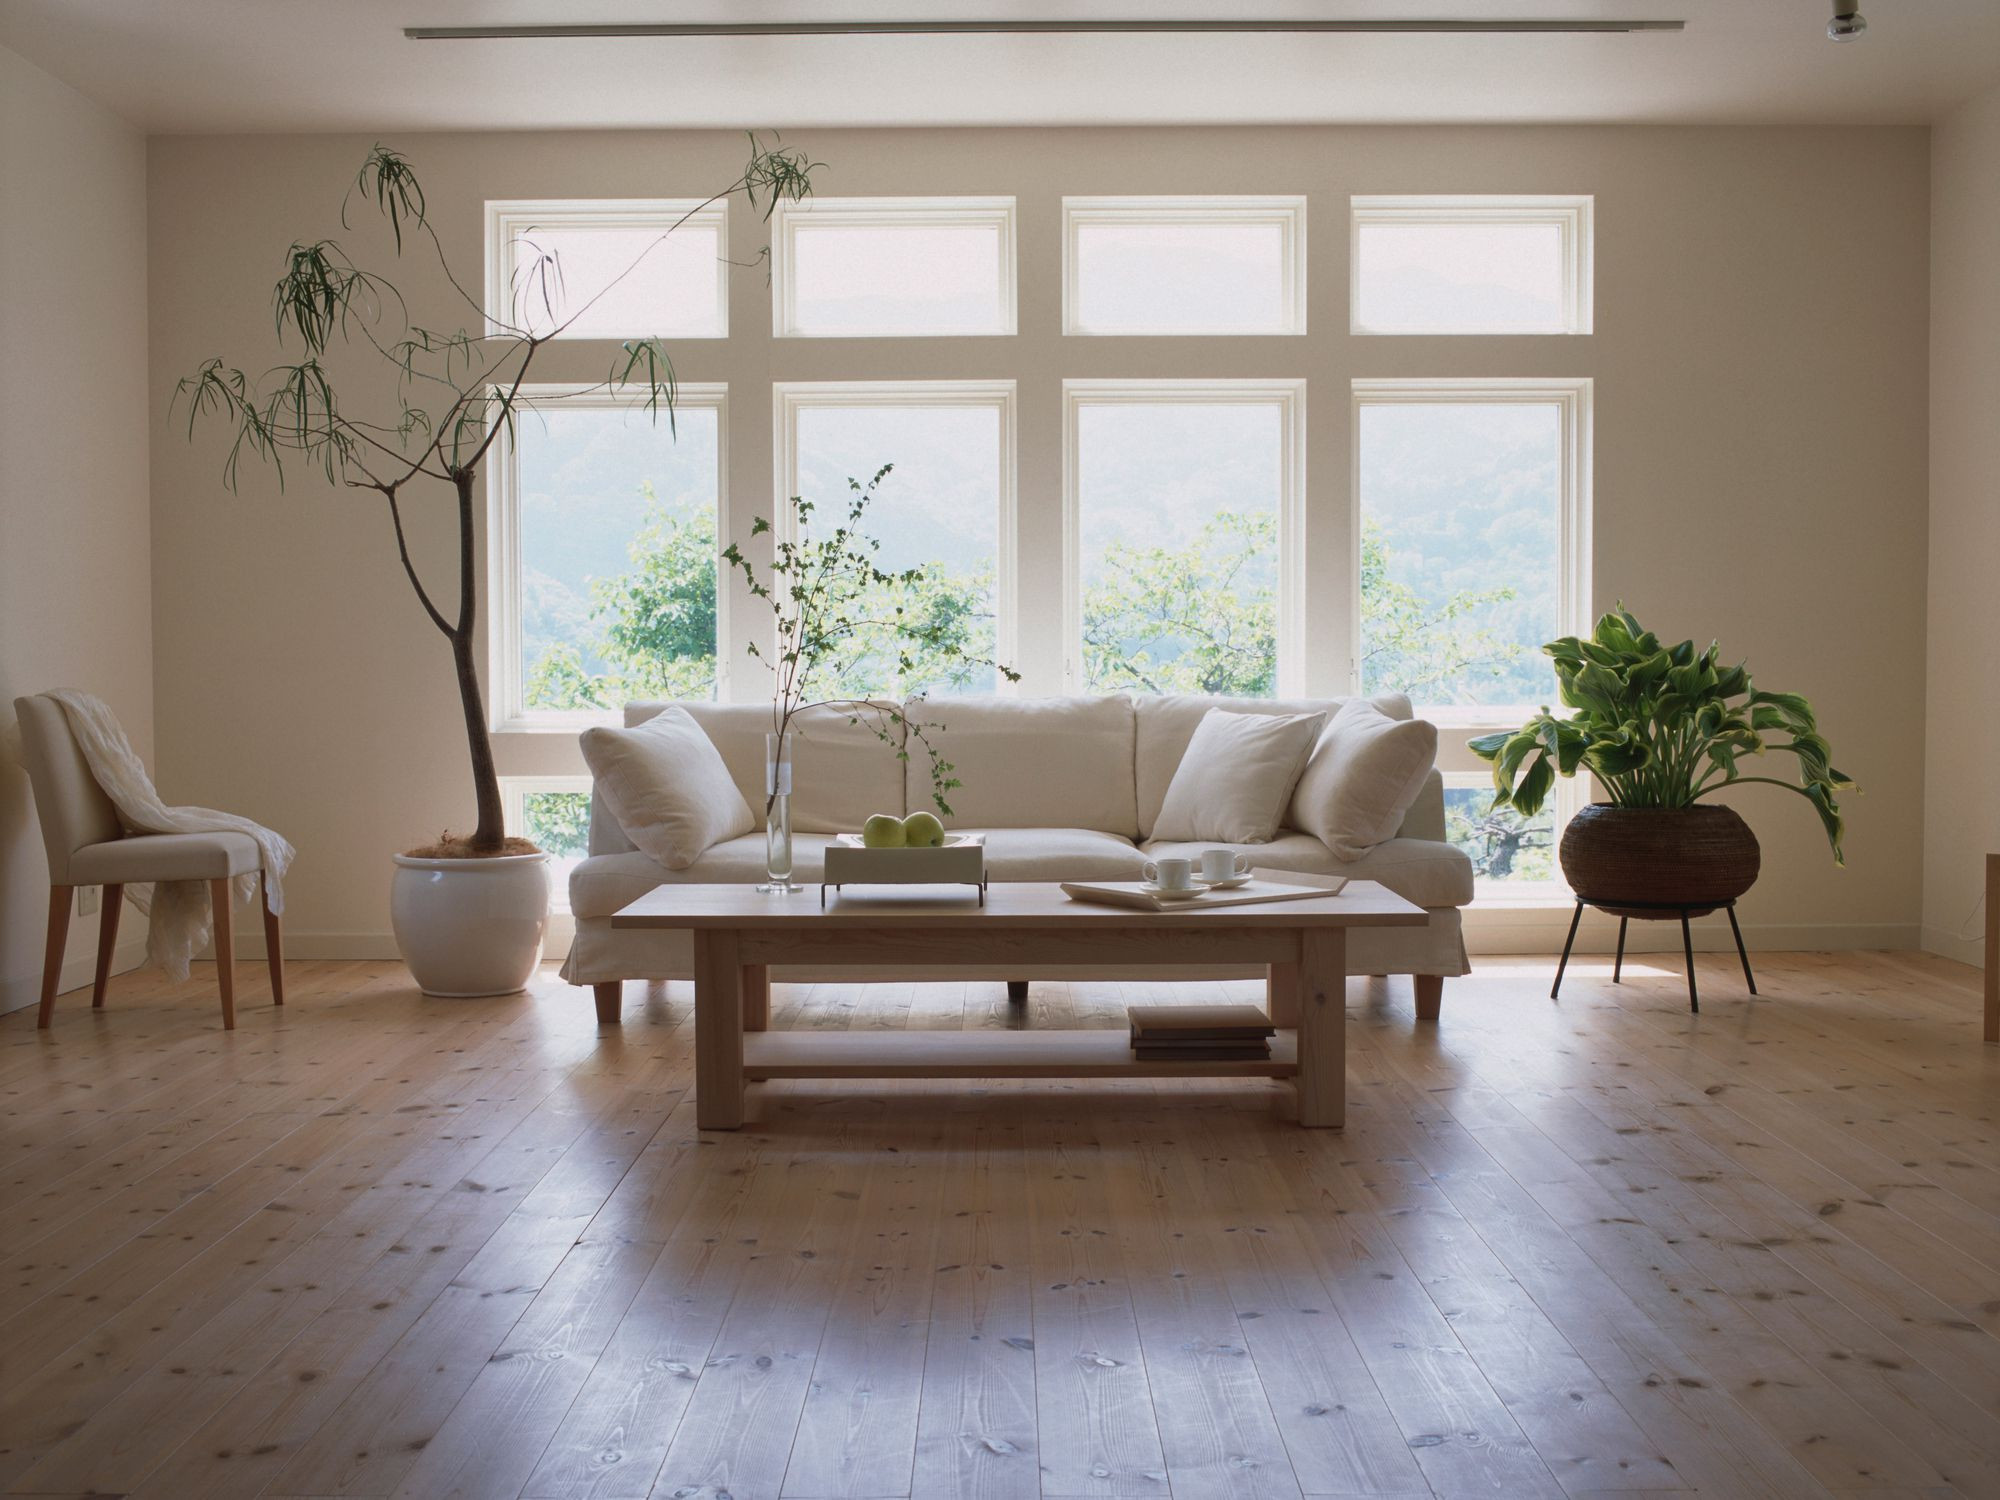 15 Fantastic Hardwood Flooring Prices south Africa 2024 free download hardwood flooring prices south africa of laminate flooring pros and cons in living room laminate floor gettyimages dexph070 001 58b5cc793df78cdcd8be2938